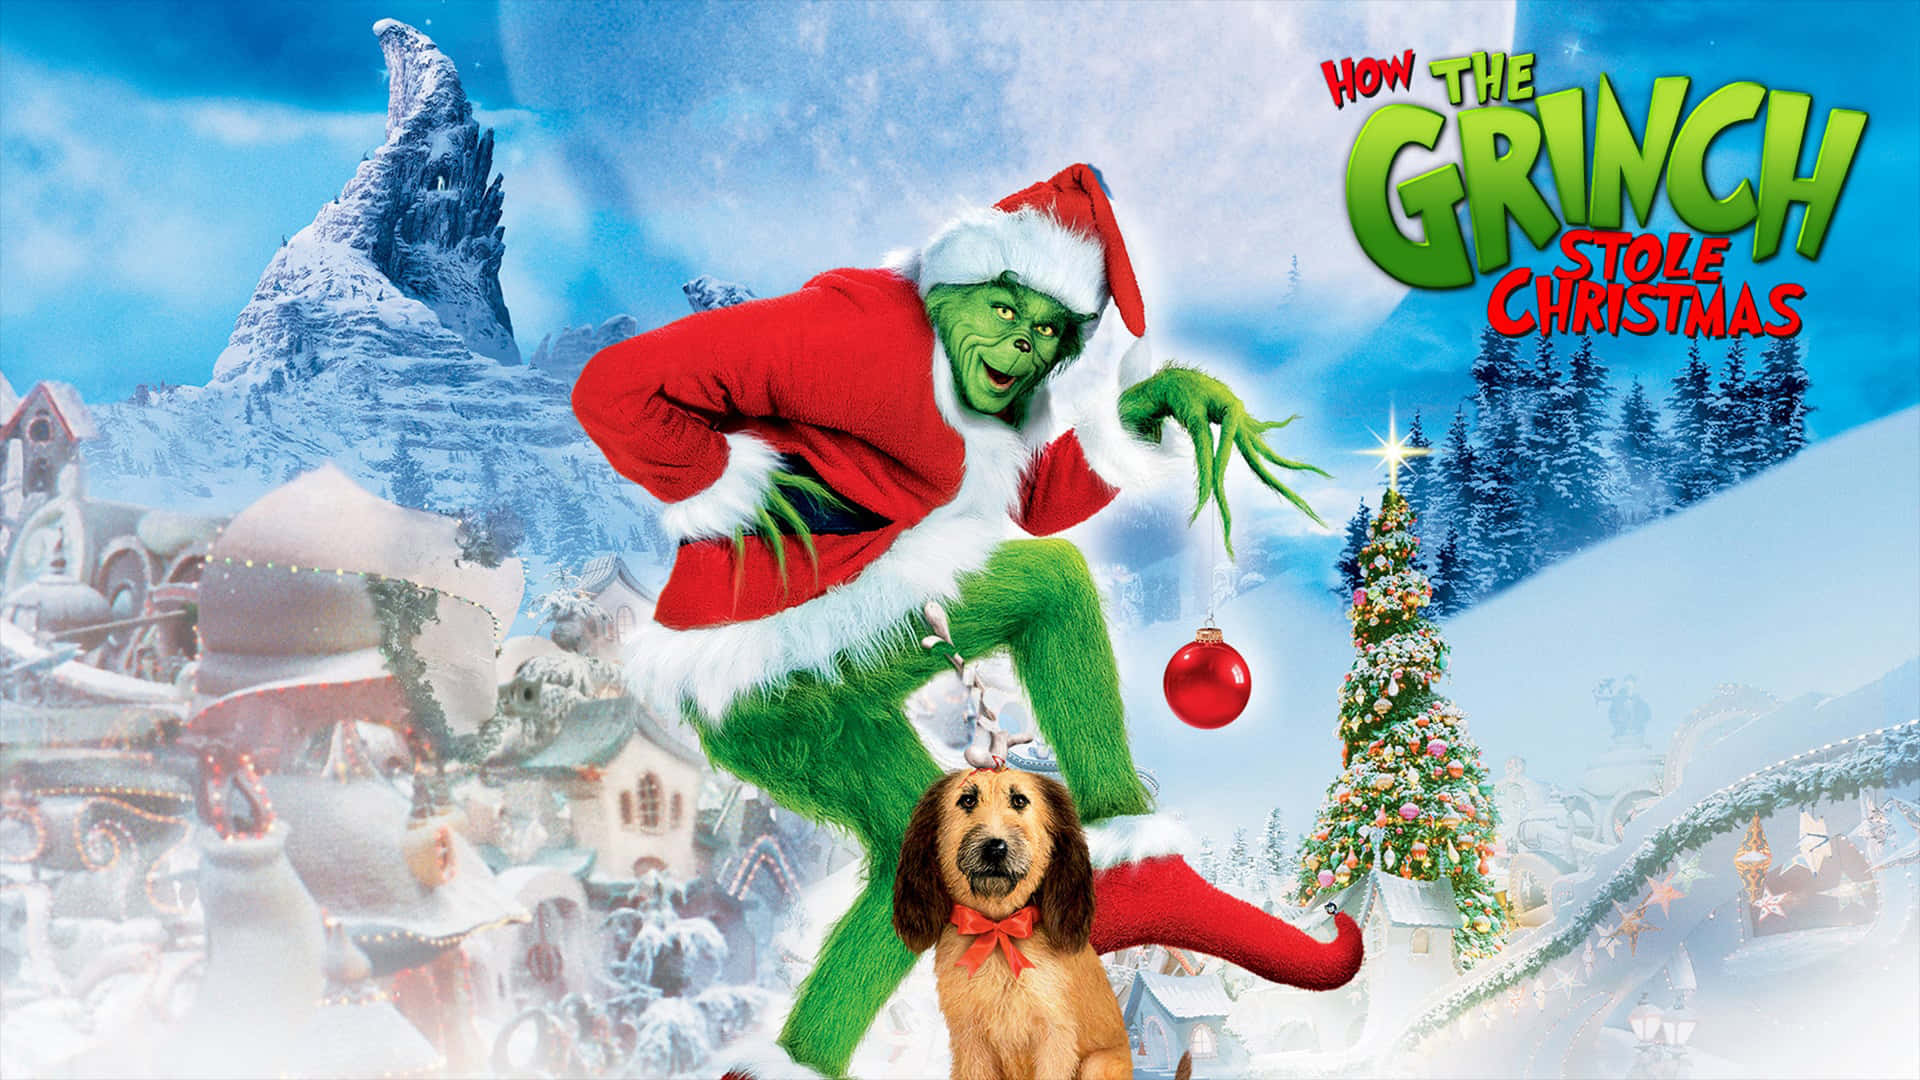 Christmas won't be the same without the Grinch